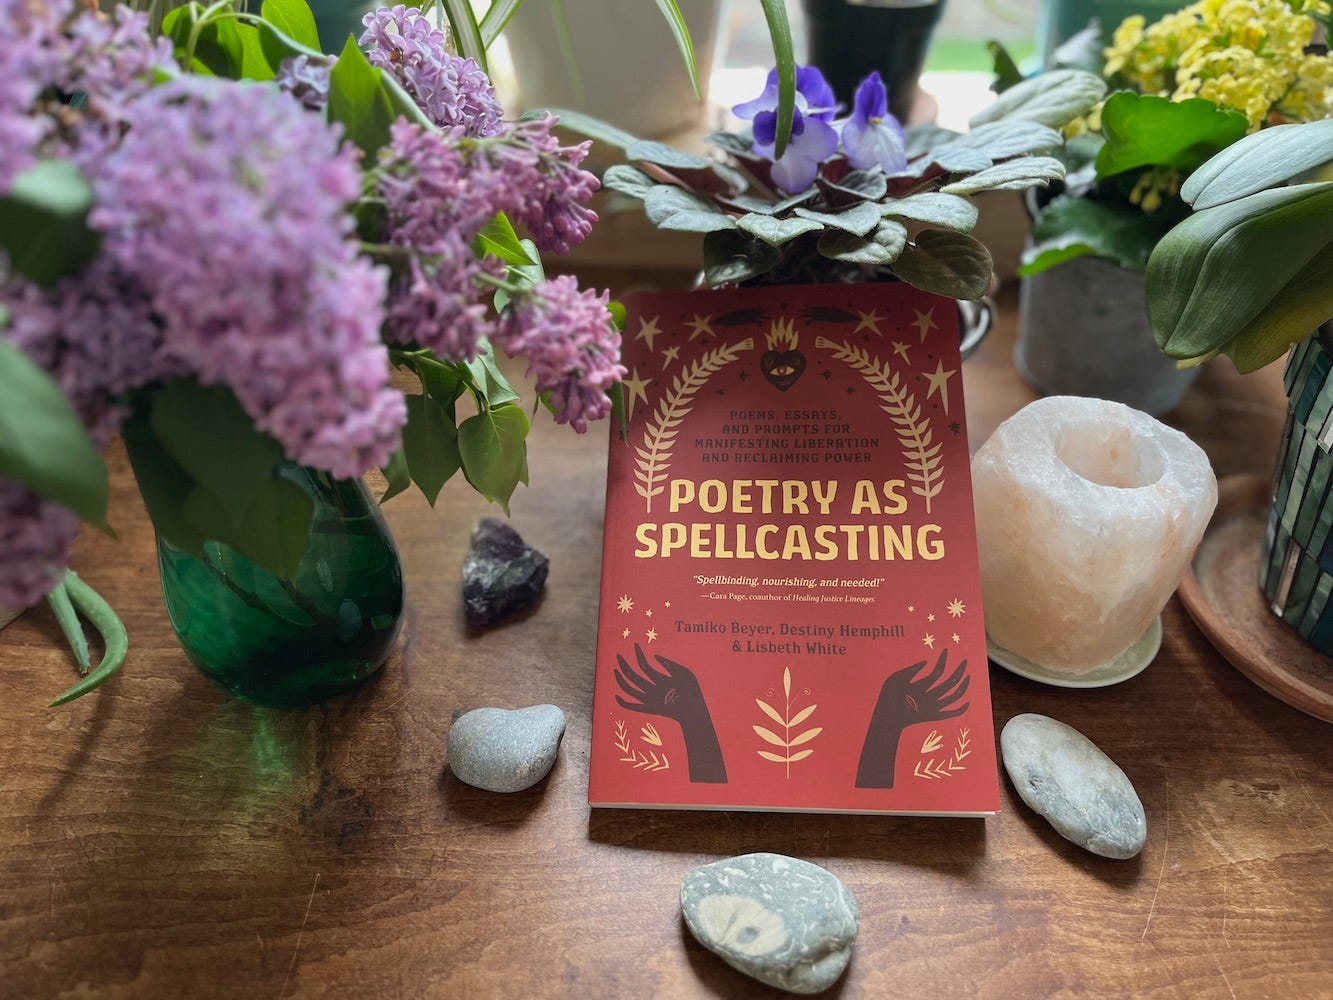 A copy of Poetry as Spellcasting among lush, flowering houseplants, cut lilacs, stones, and crystals.